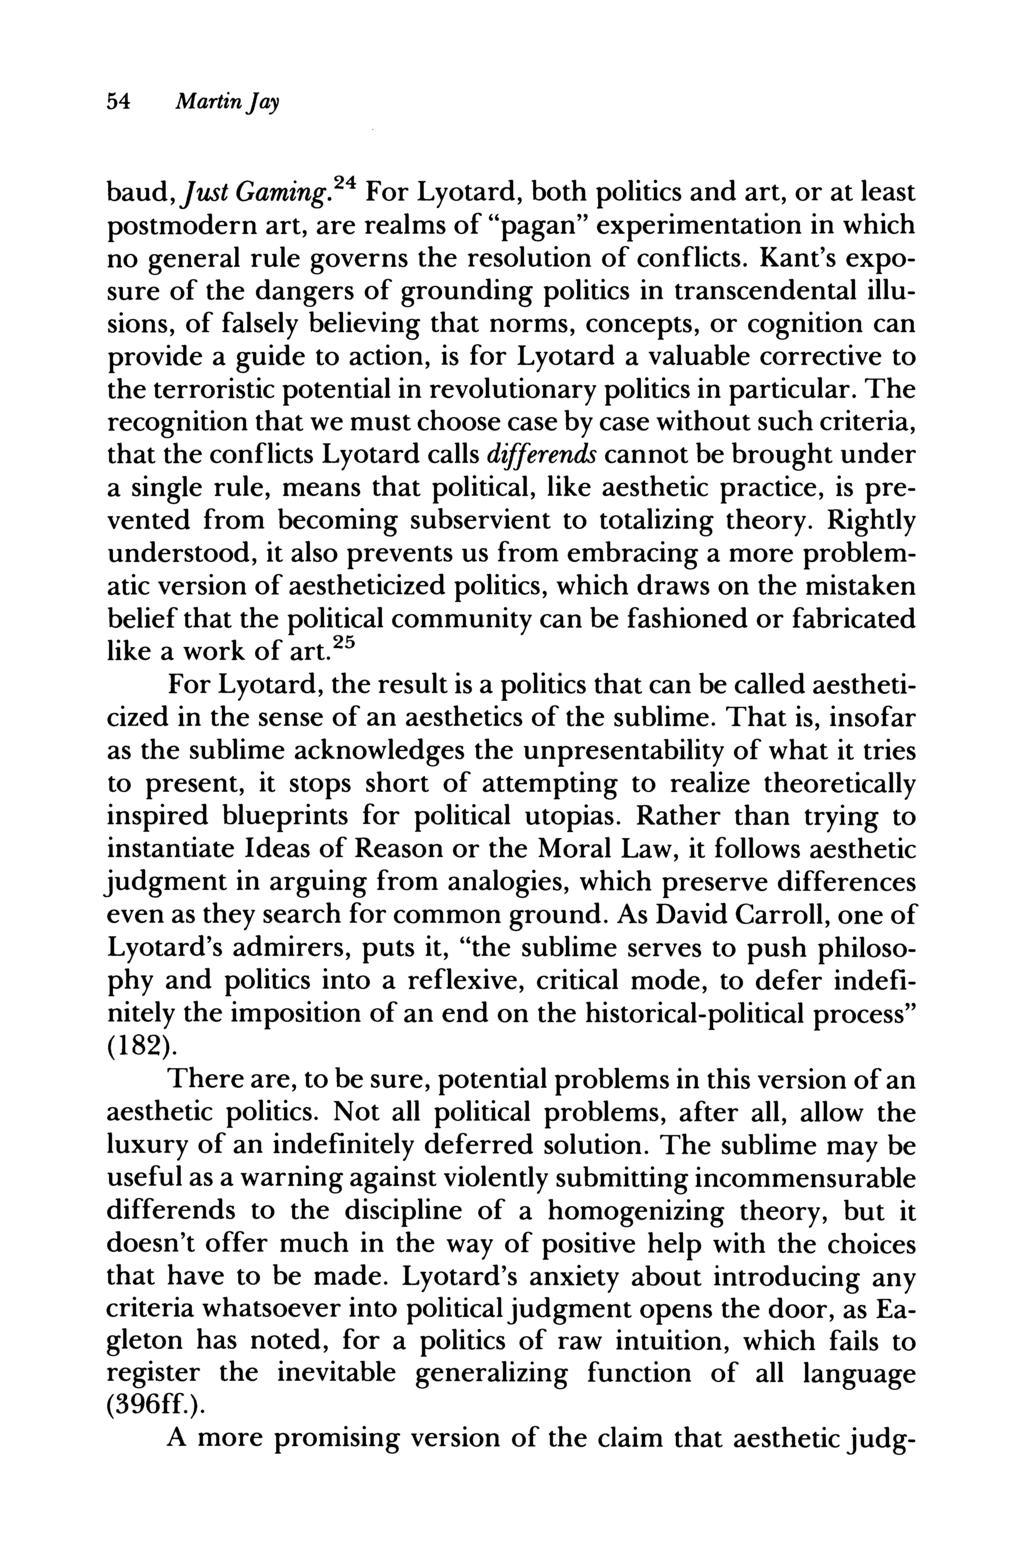 54 Martin Jay baud,just Gaming.24 For Lyotard, both politics and art, or at least postmodern art, are realms of "pagan" experimentation in which no general rule governs the resolution of conflicts.